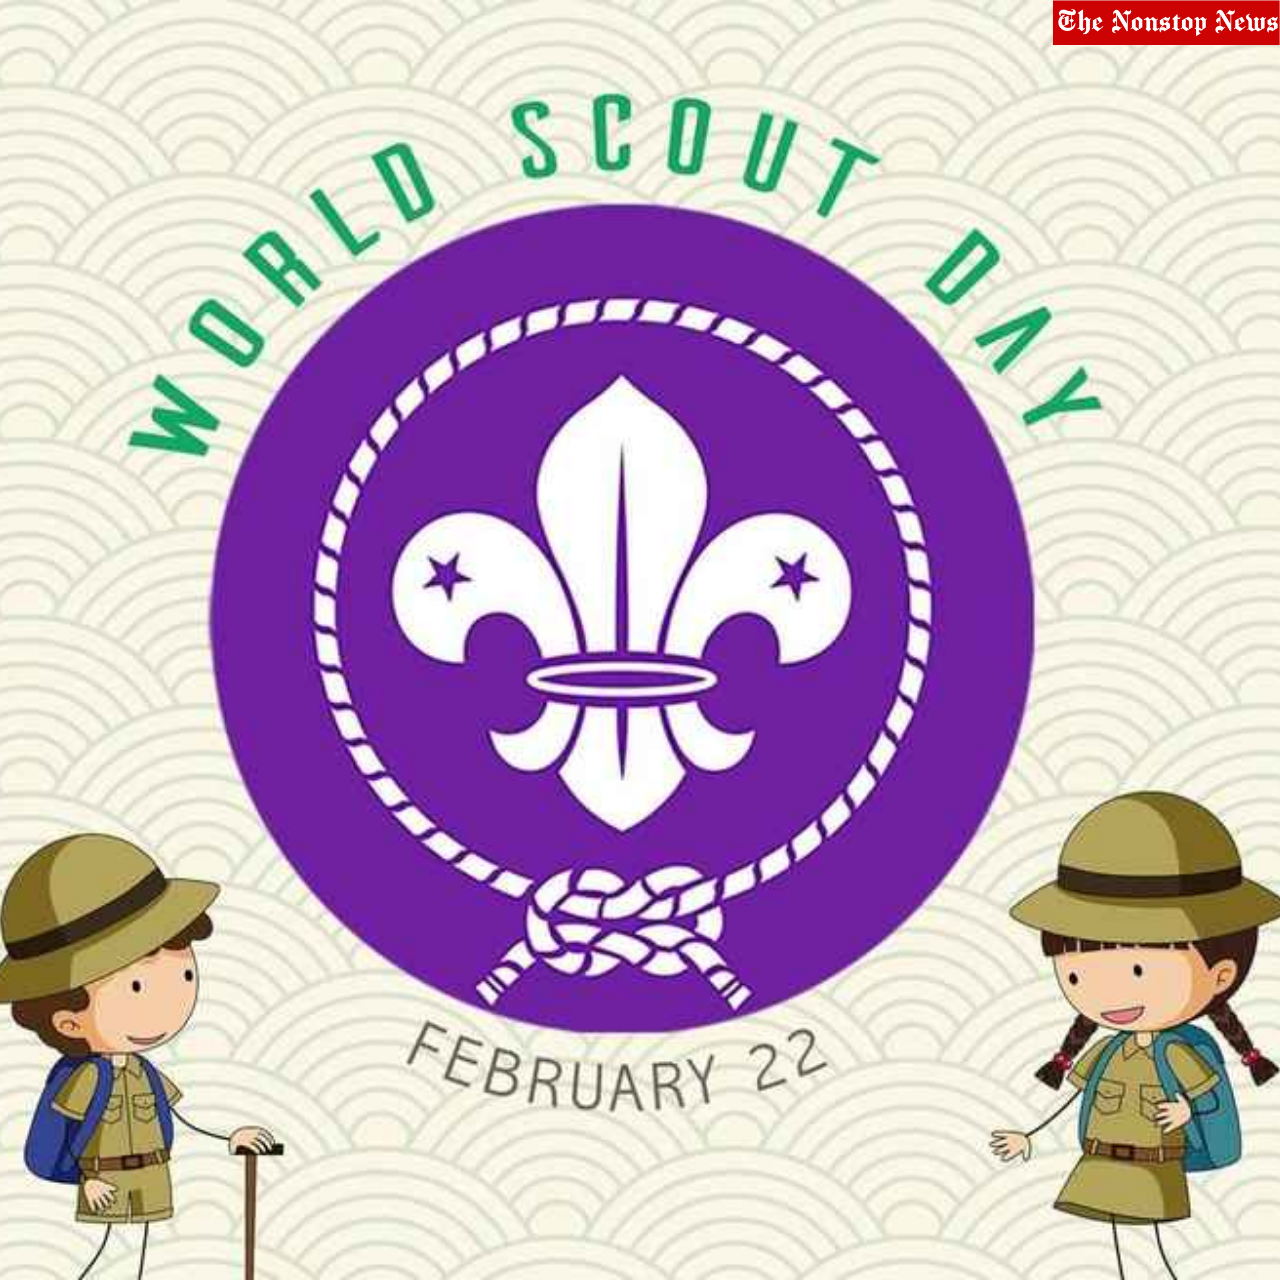 World Scout Day 2022 Date, Theme, History, Significance, Importance, Activities, and More